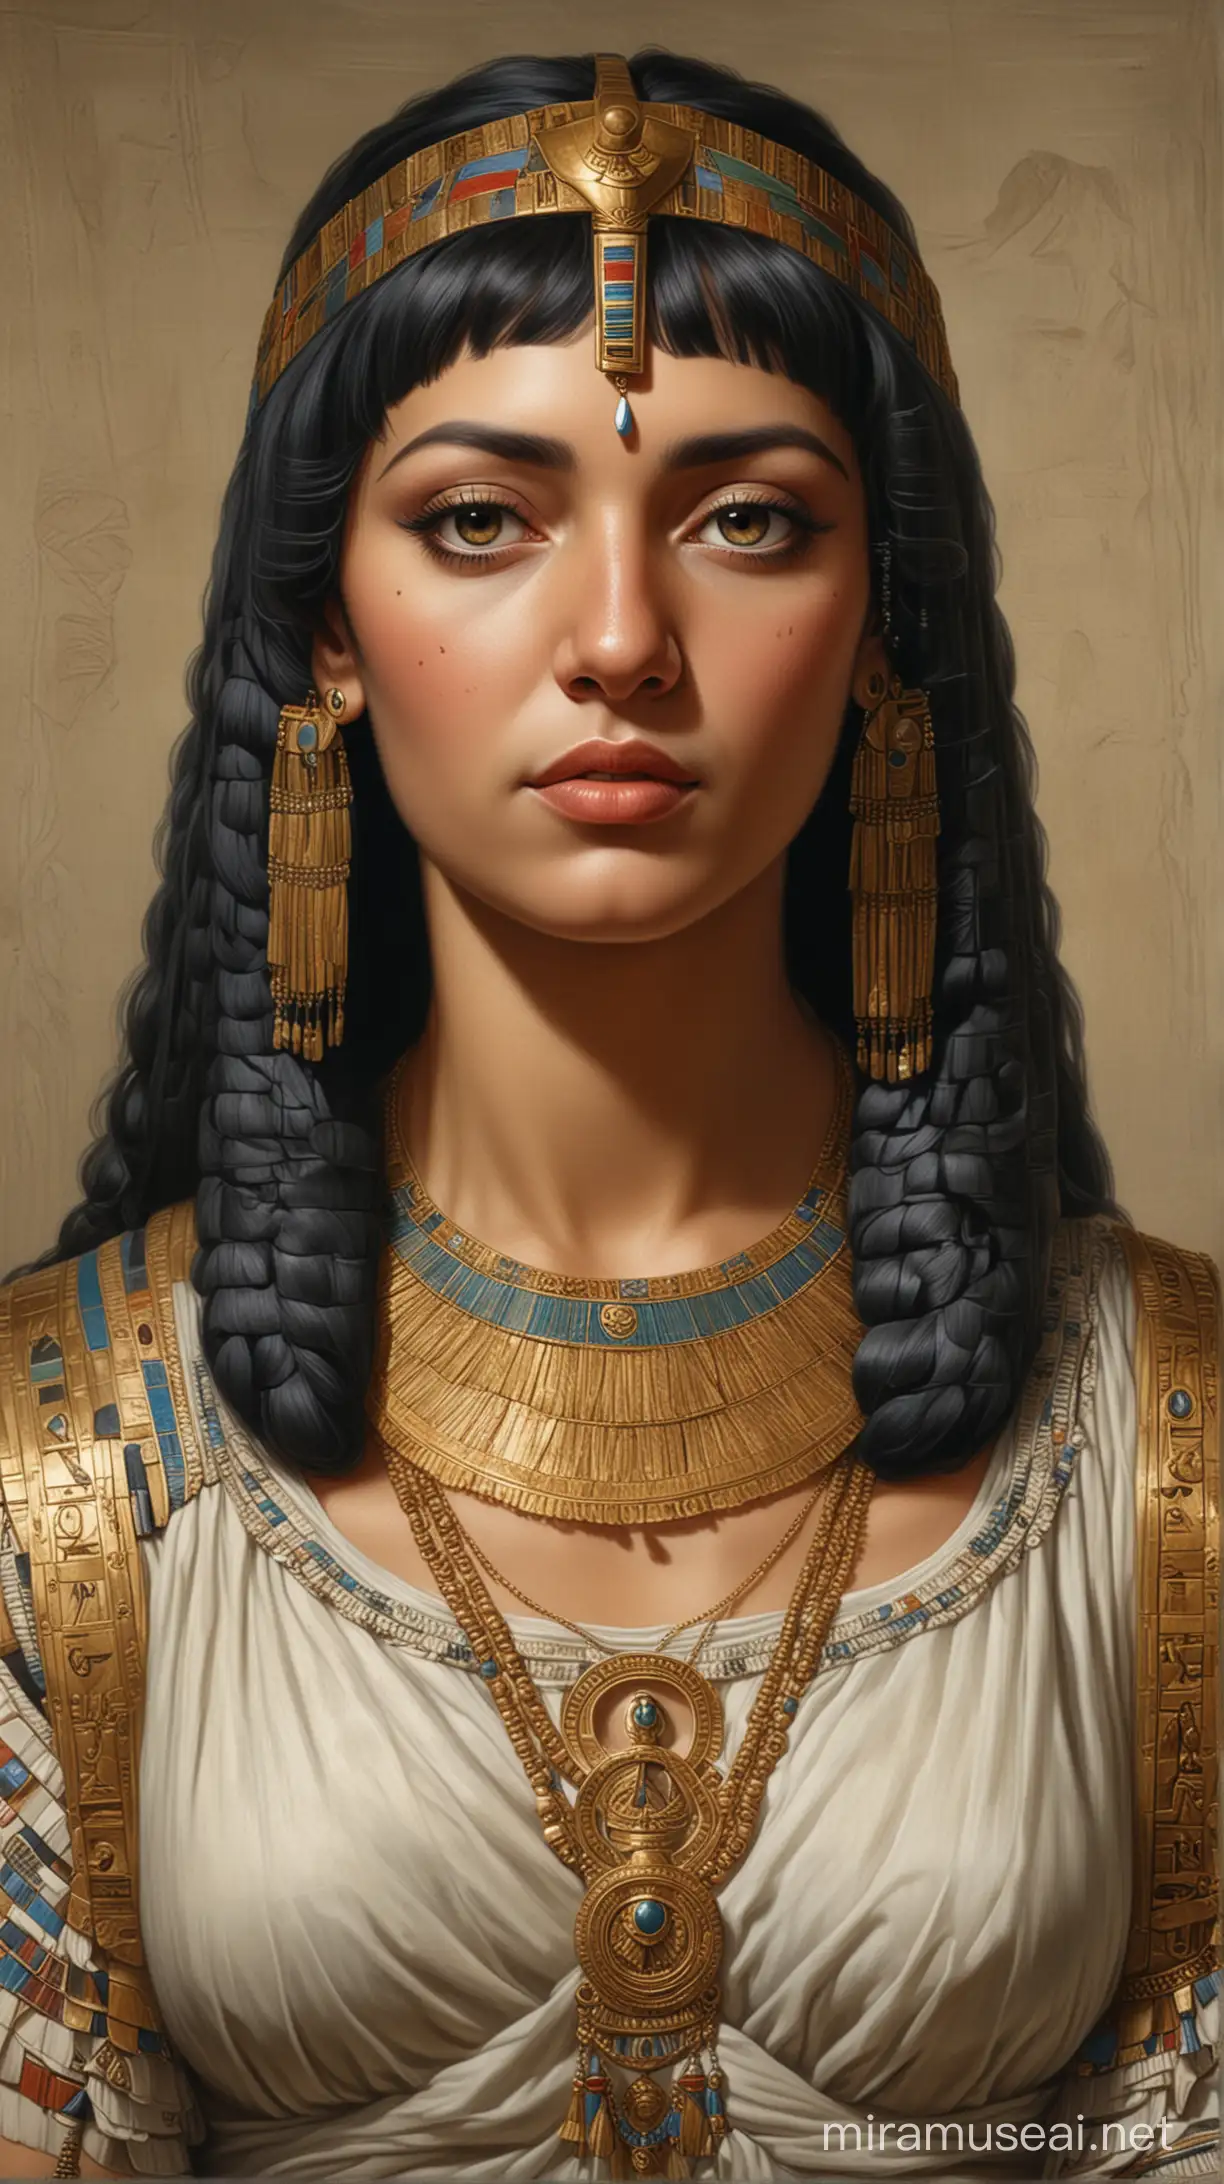 Portraits of Cleopatra alongside other prominent figures of her time, illustrating her political influence and alliances.hyperrealistic